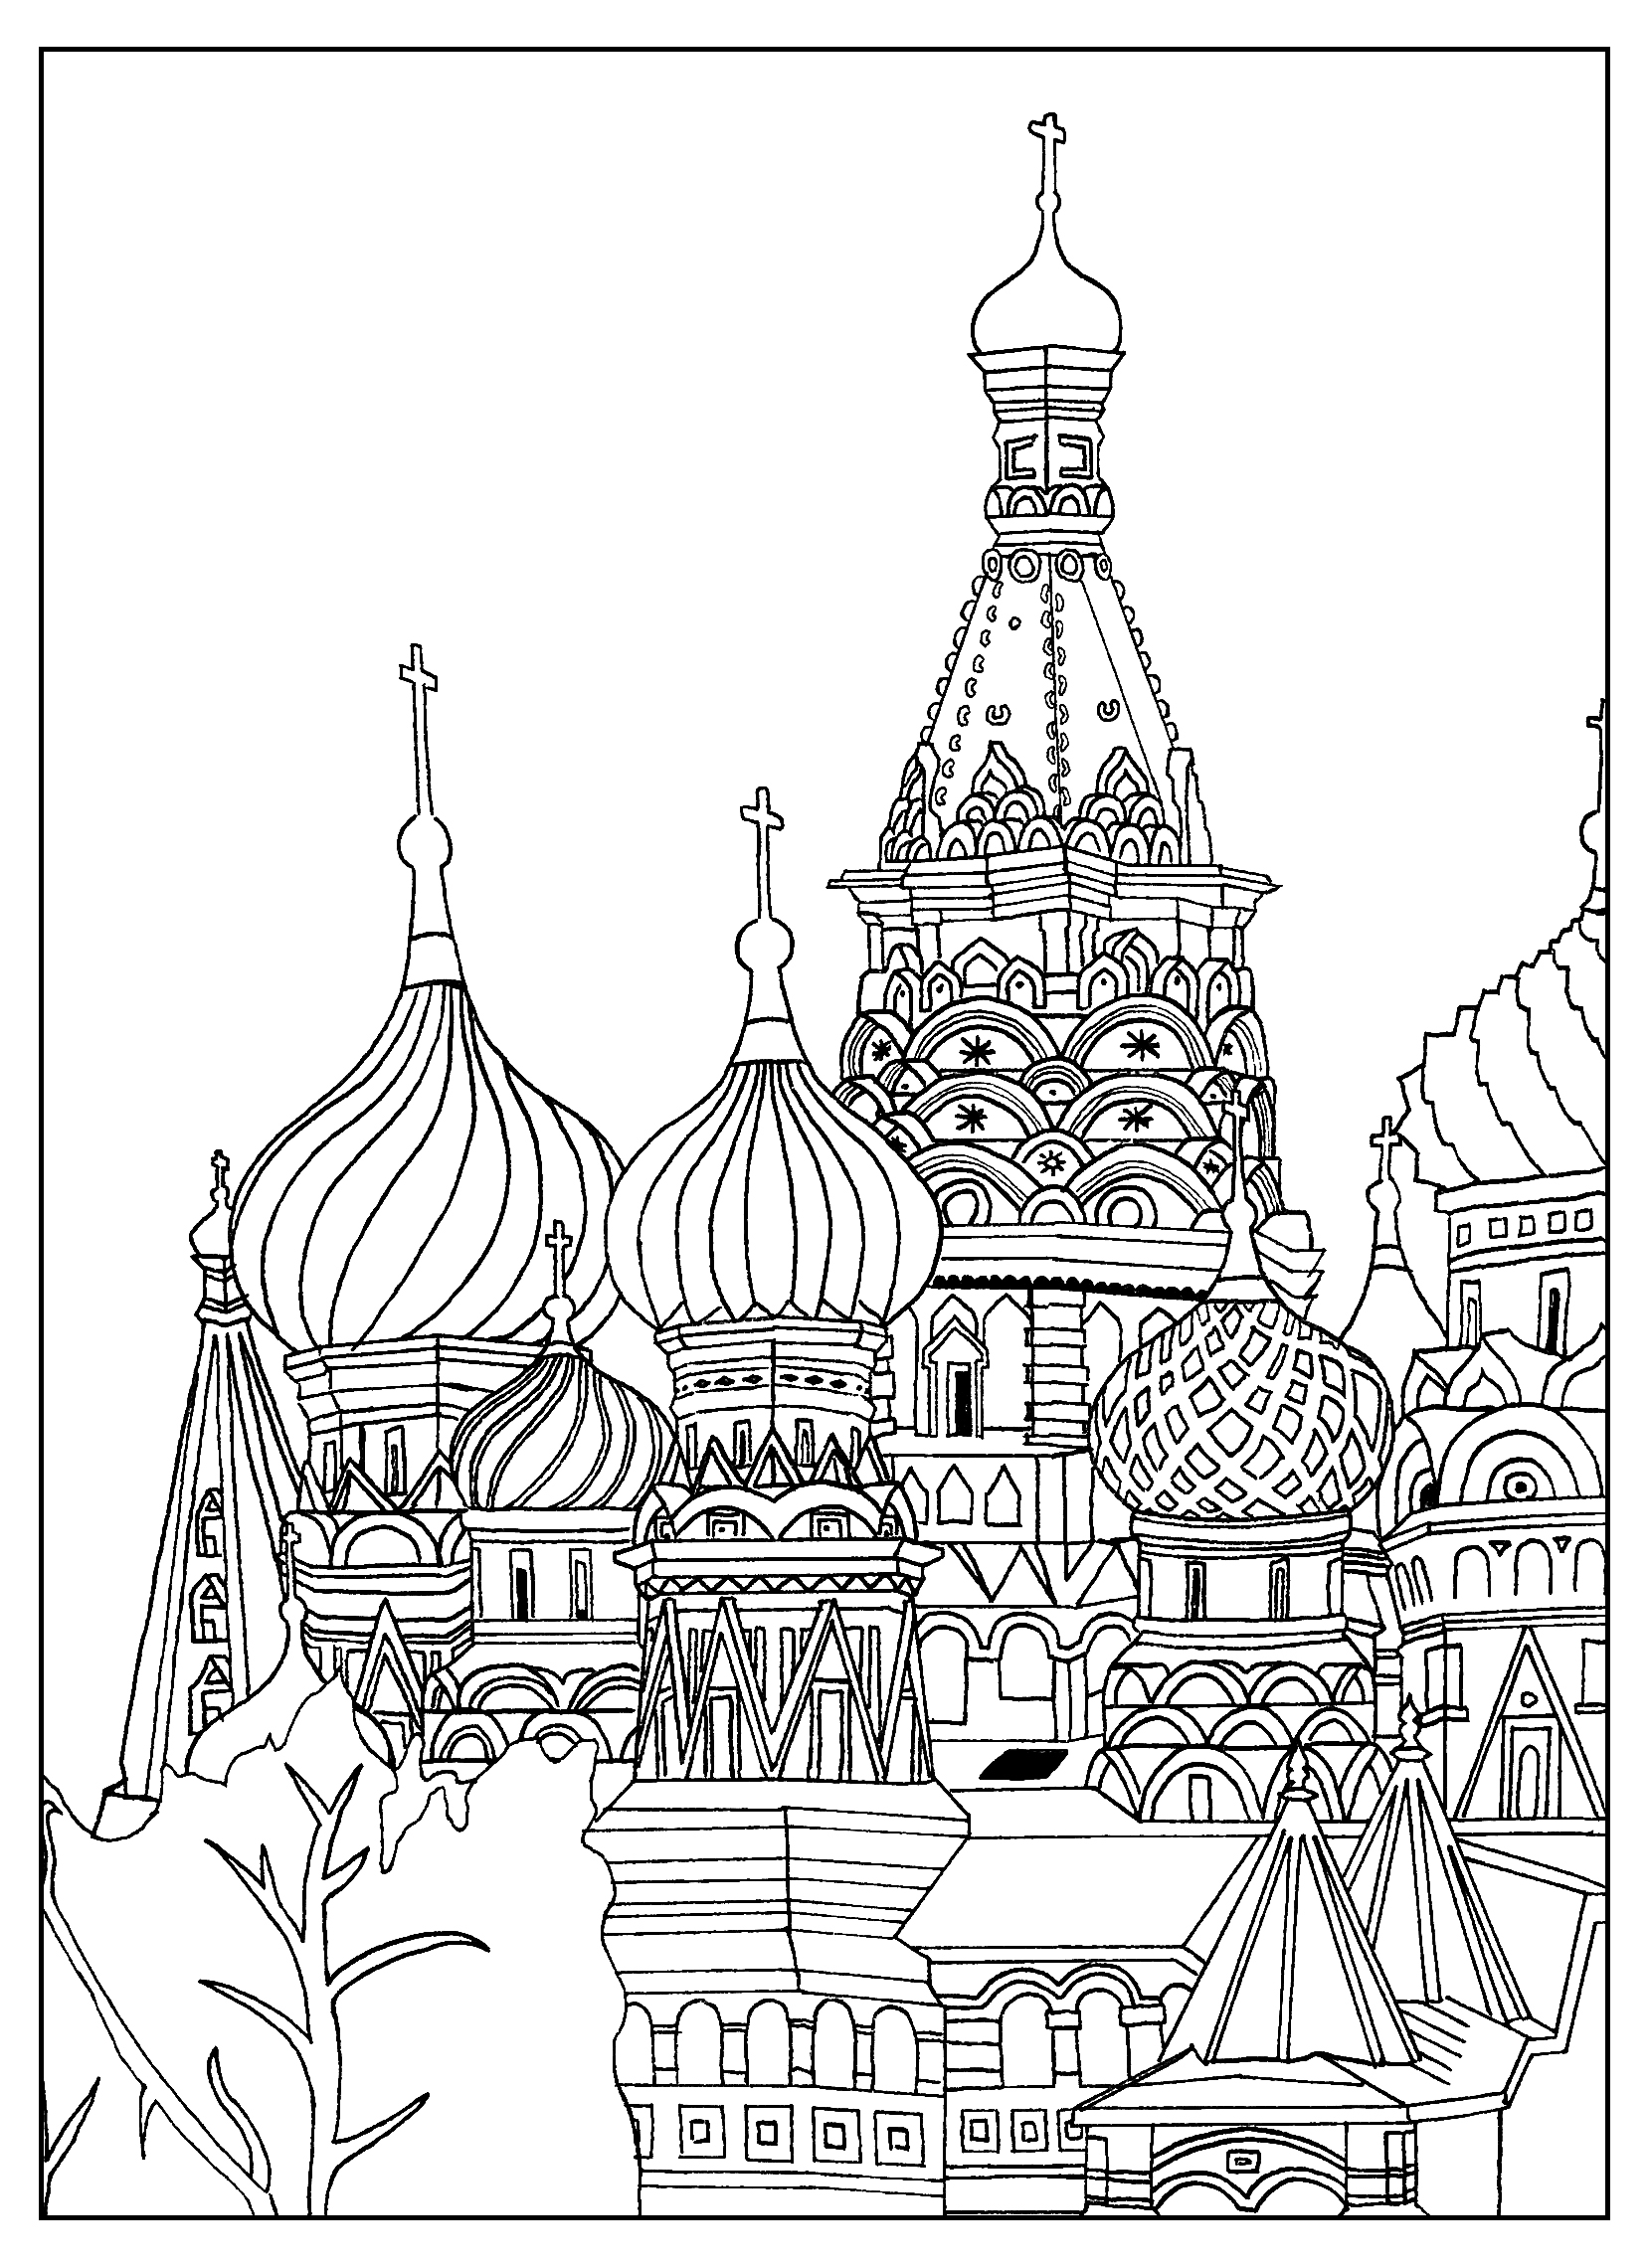 Adult coloring page of the Saint Basil's Cathedral, in Red Square in Moscow. By Sofian, Artist : Sofian